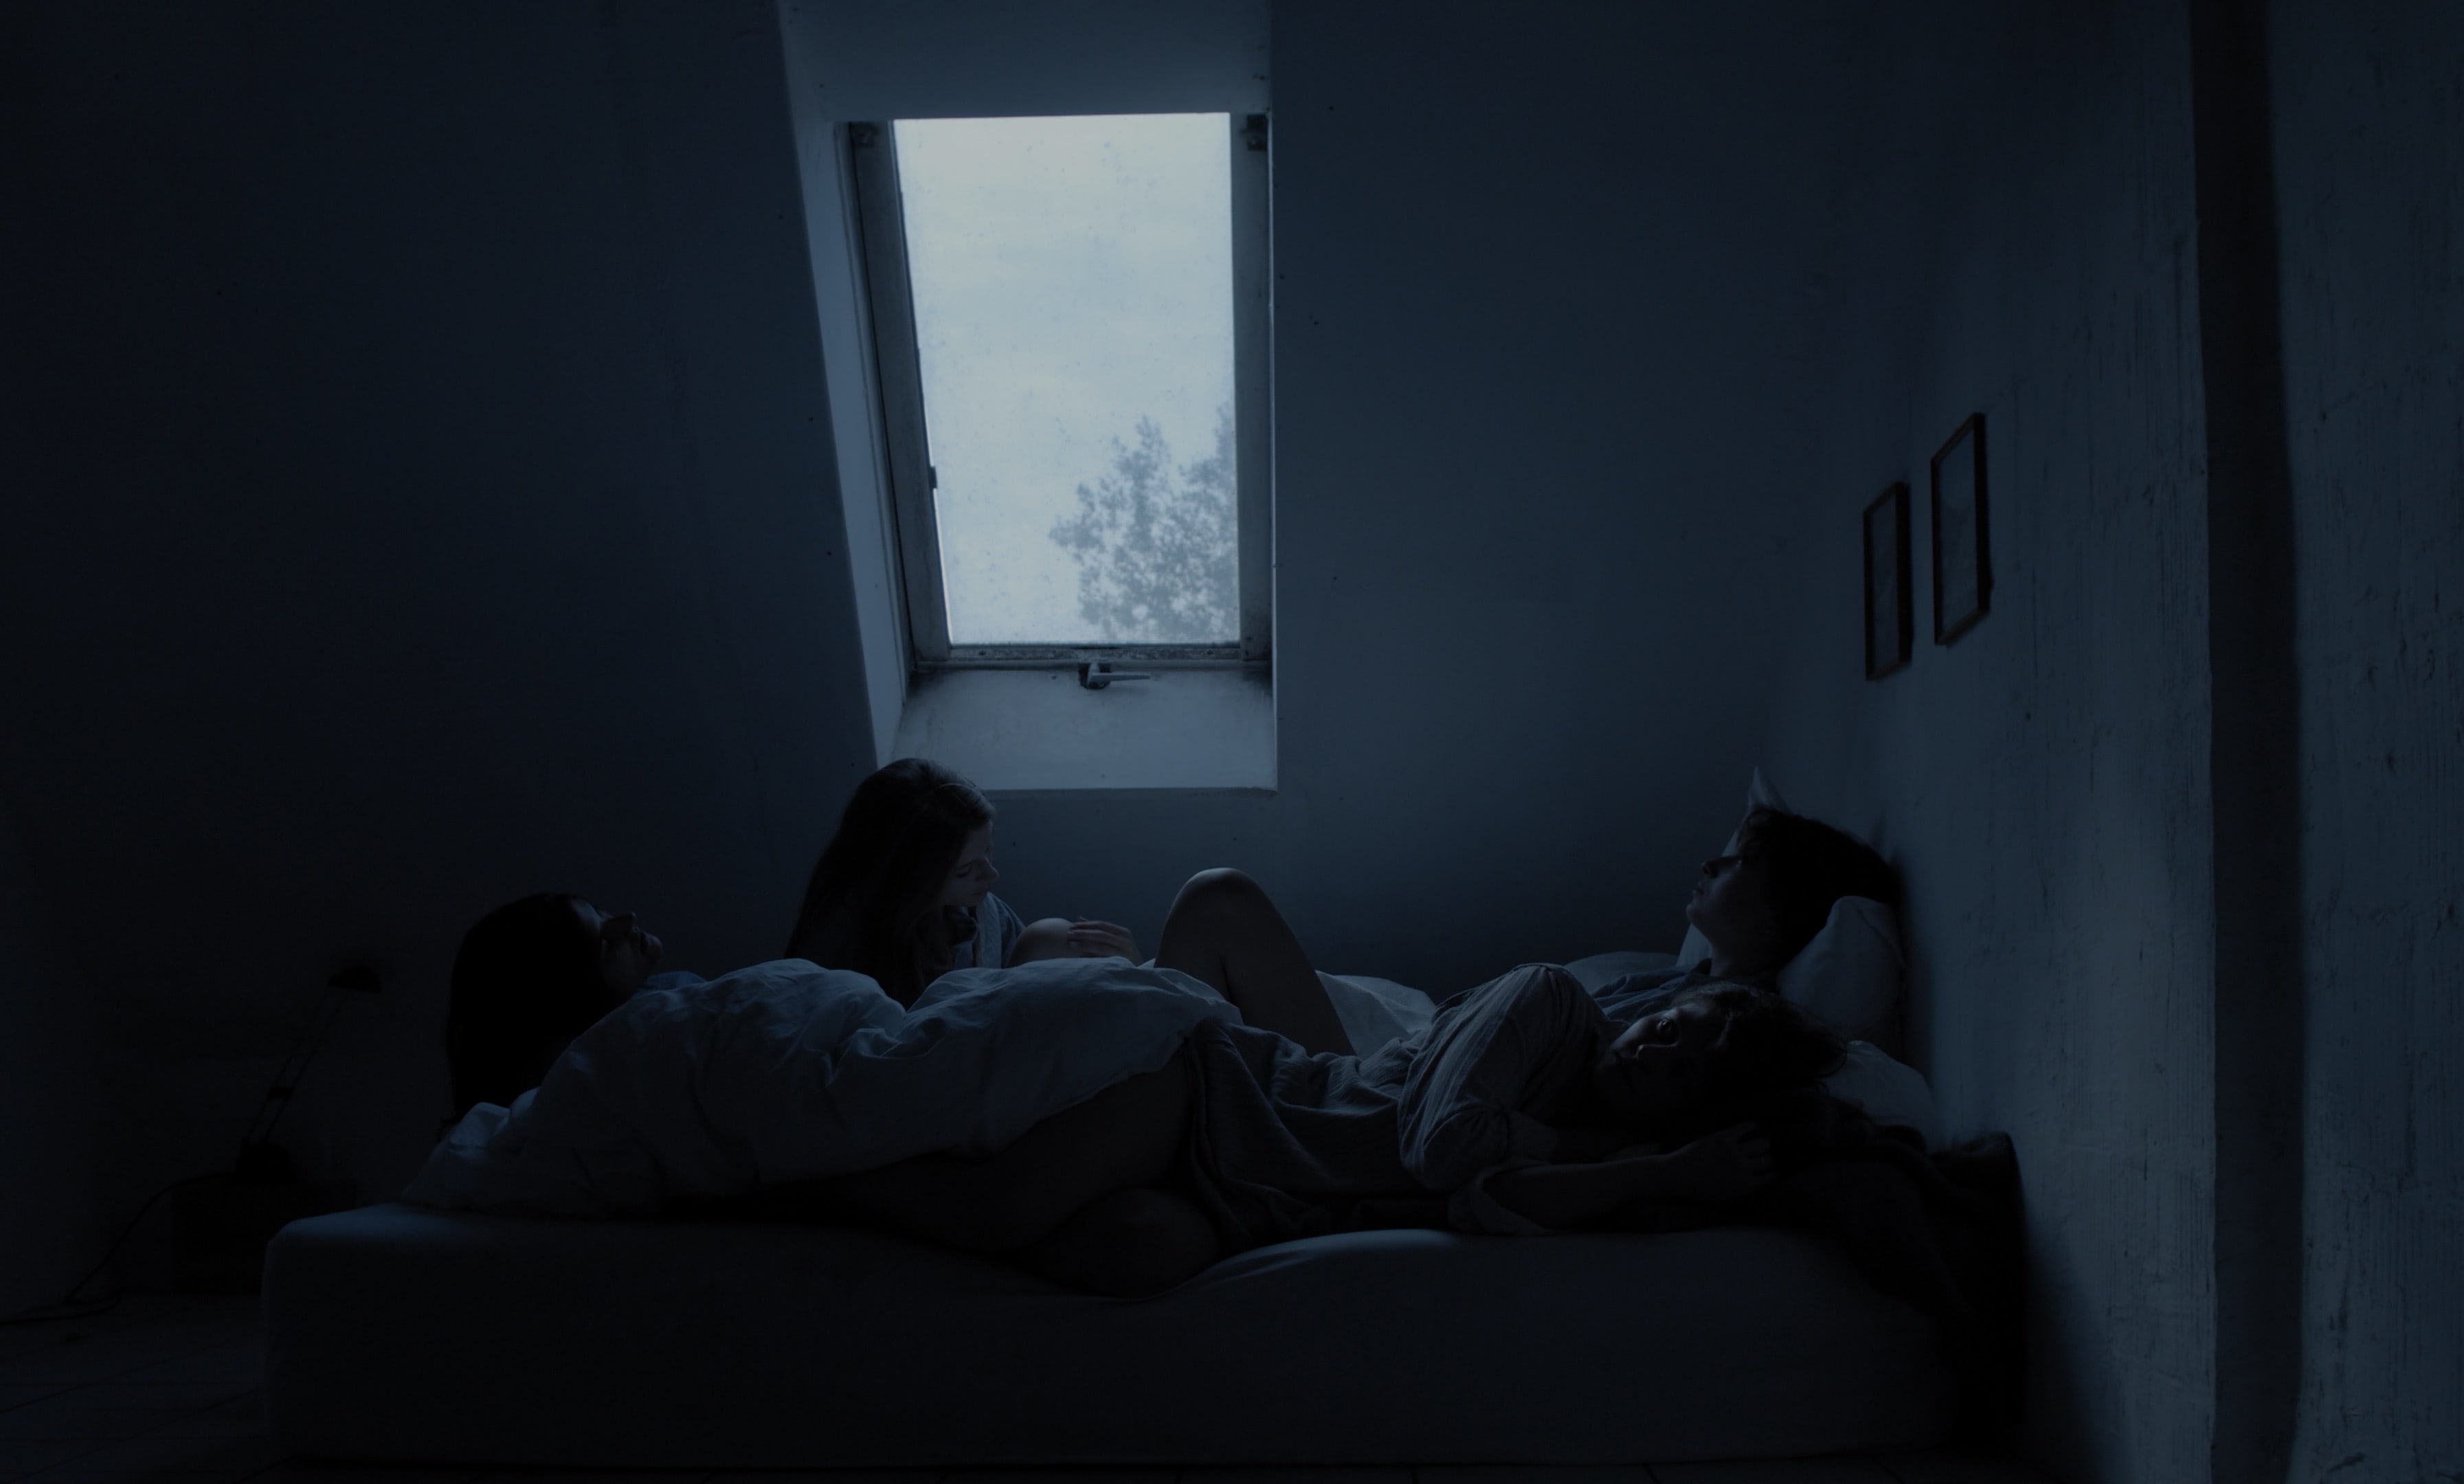 Four women lying in bed, waiting for something. Early morning light falls through the window. 